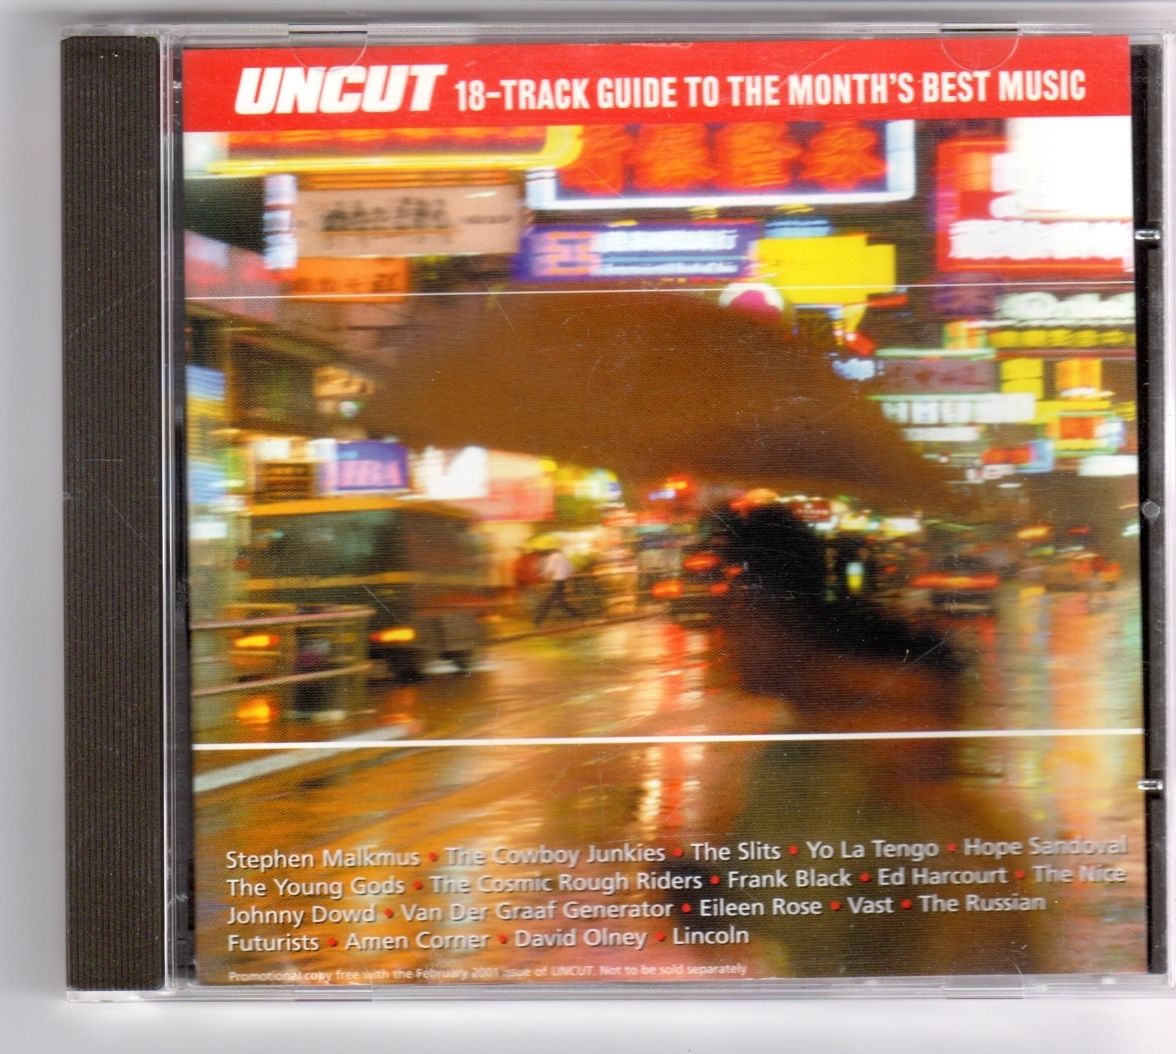 Various Artists - 18-Track Guide to the Month's Best Music (UNCUT CD 2001) - Het Plaathuis1176 x 1054